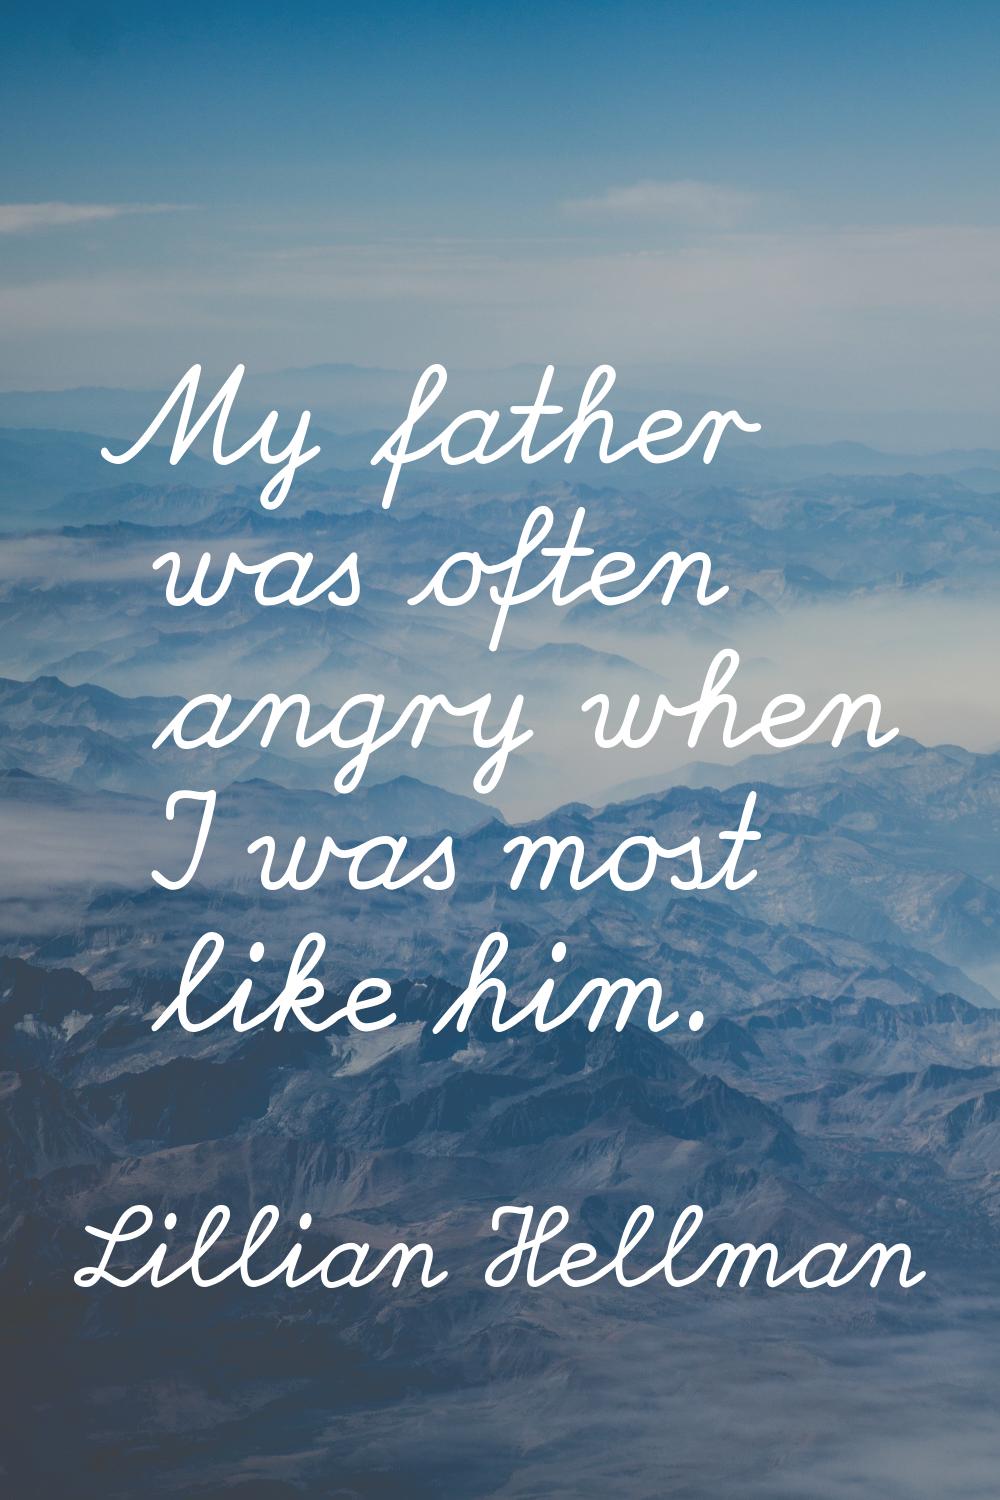 My father was often angry when I was most like him.